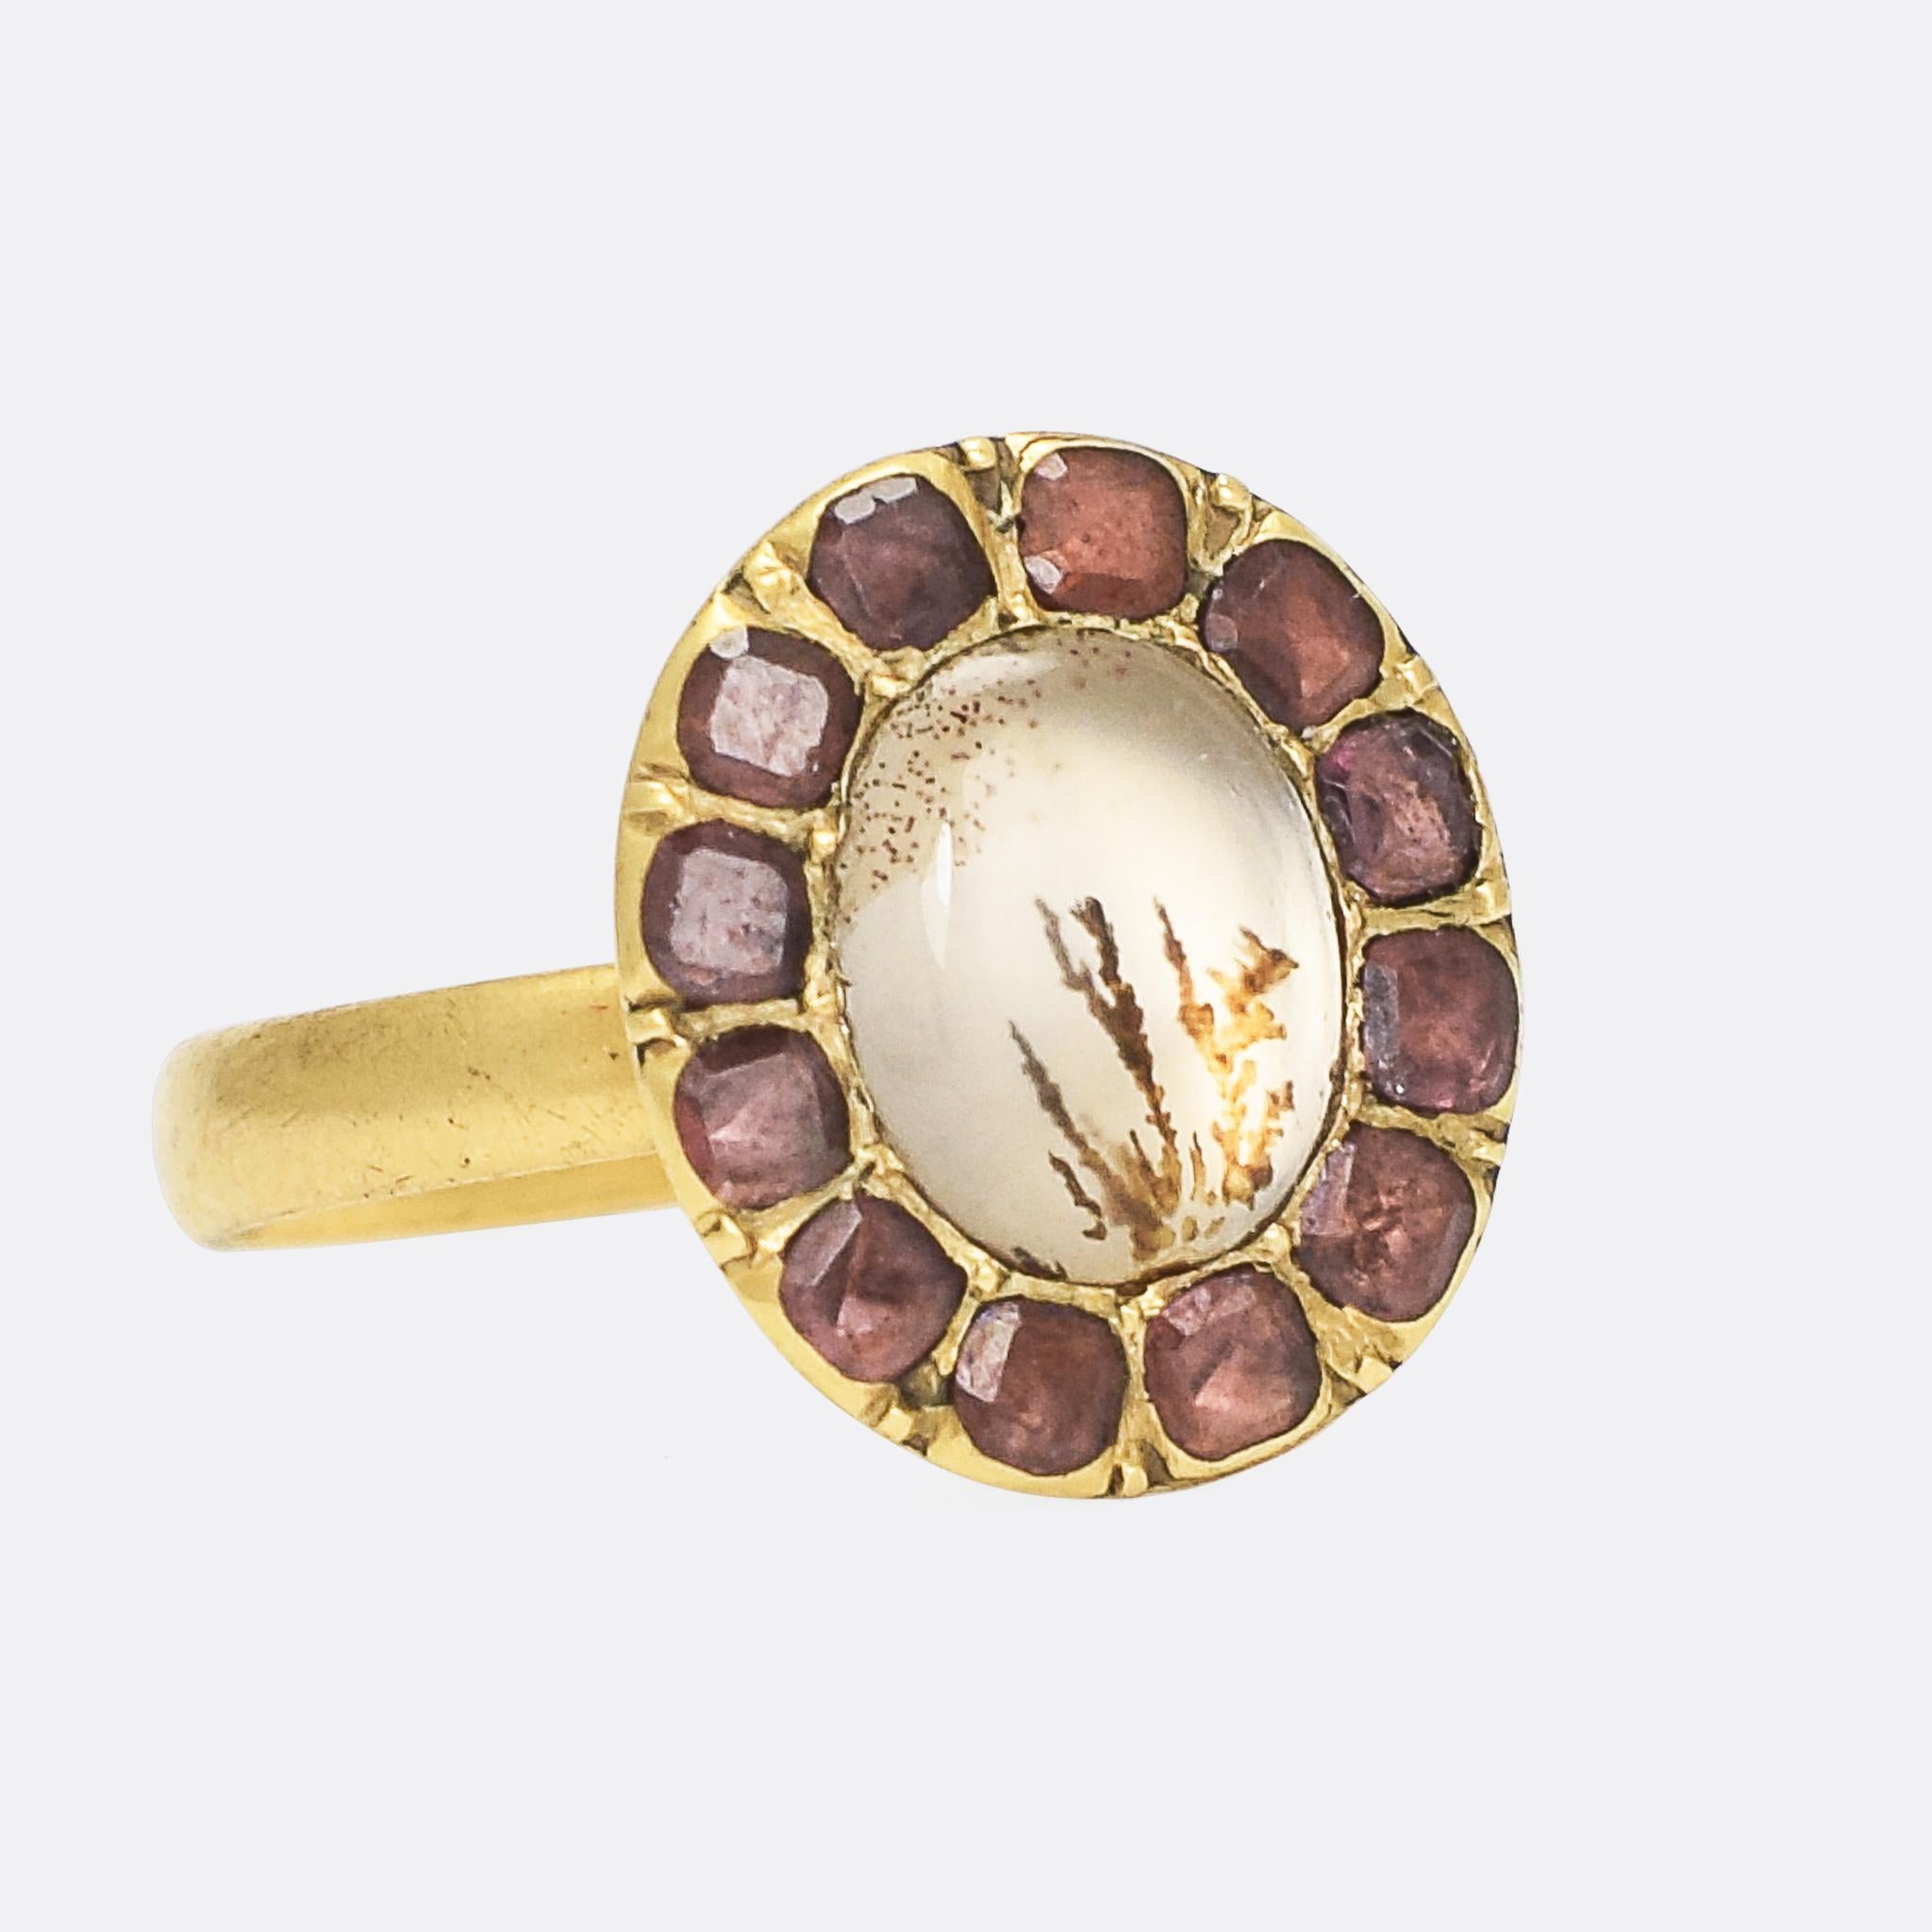 A beautiful Georgian dendritic agate picture frame ring. The principal stone displays fern-like markings, and has been foil-backed creating a hazy white glow as the light reflects back through it. The agate rests within a frame of flat cut garnets,